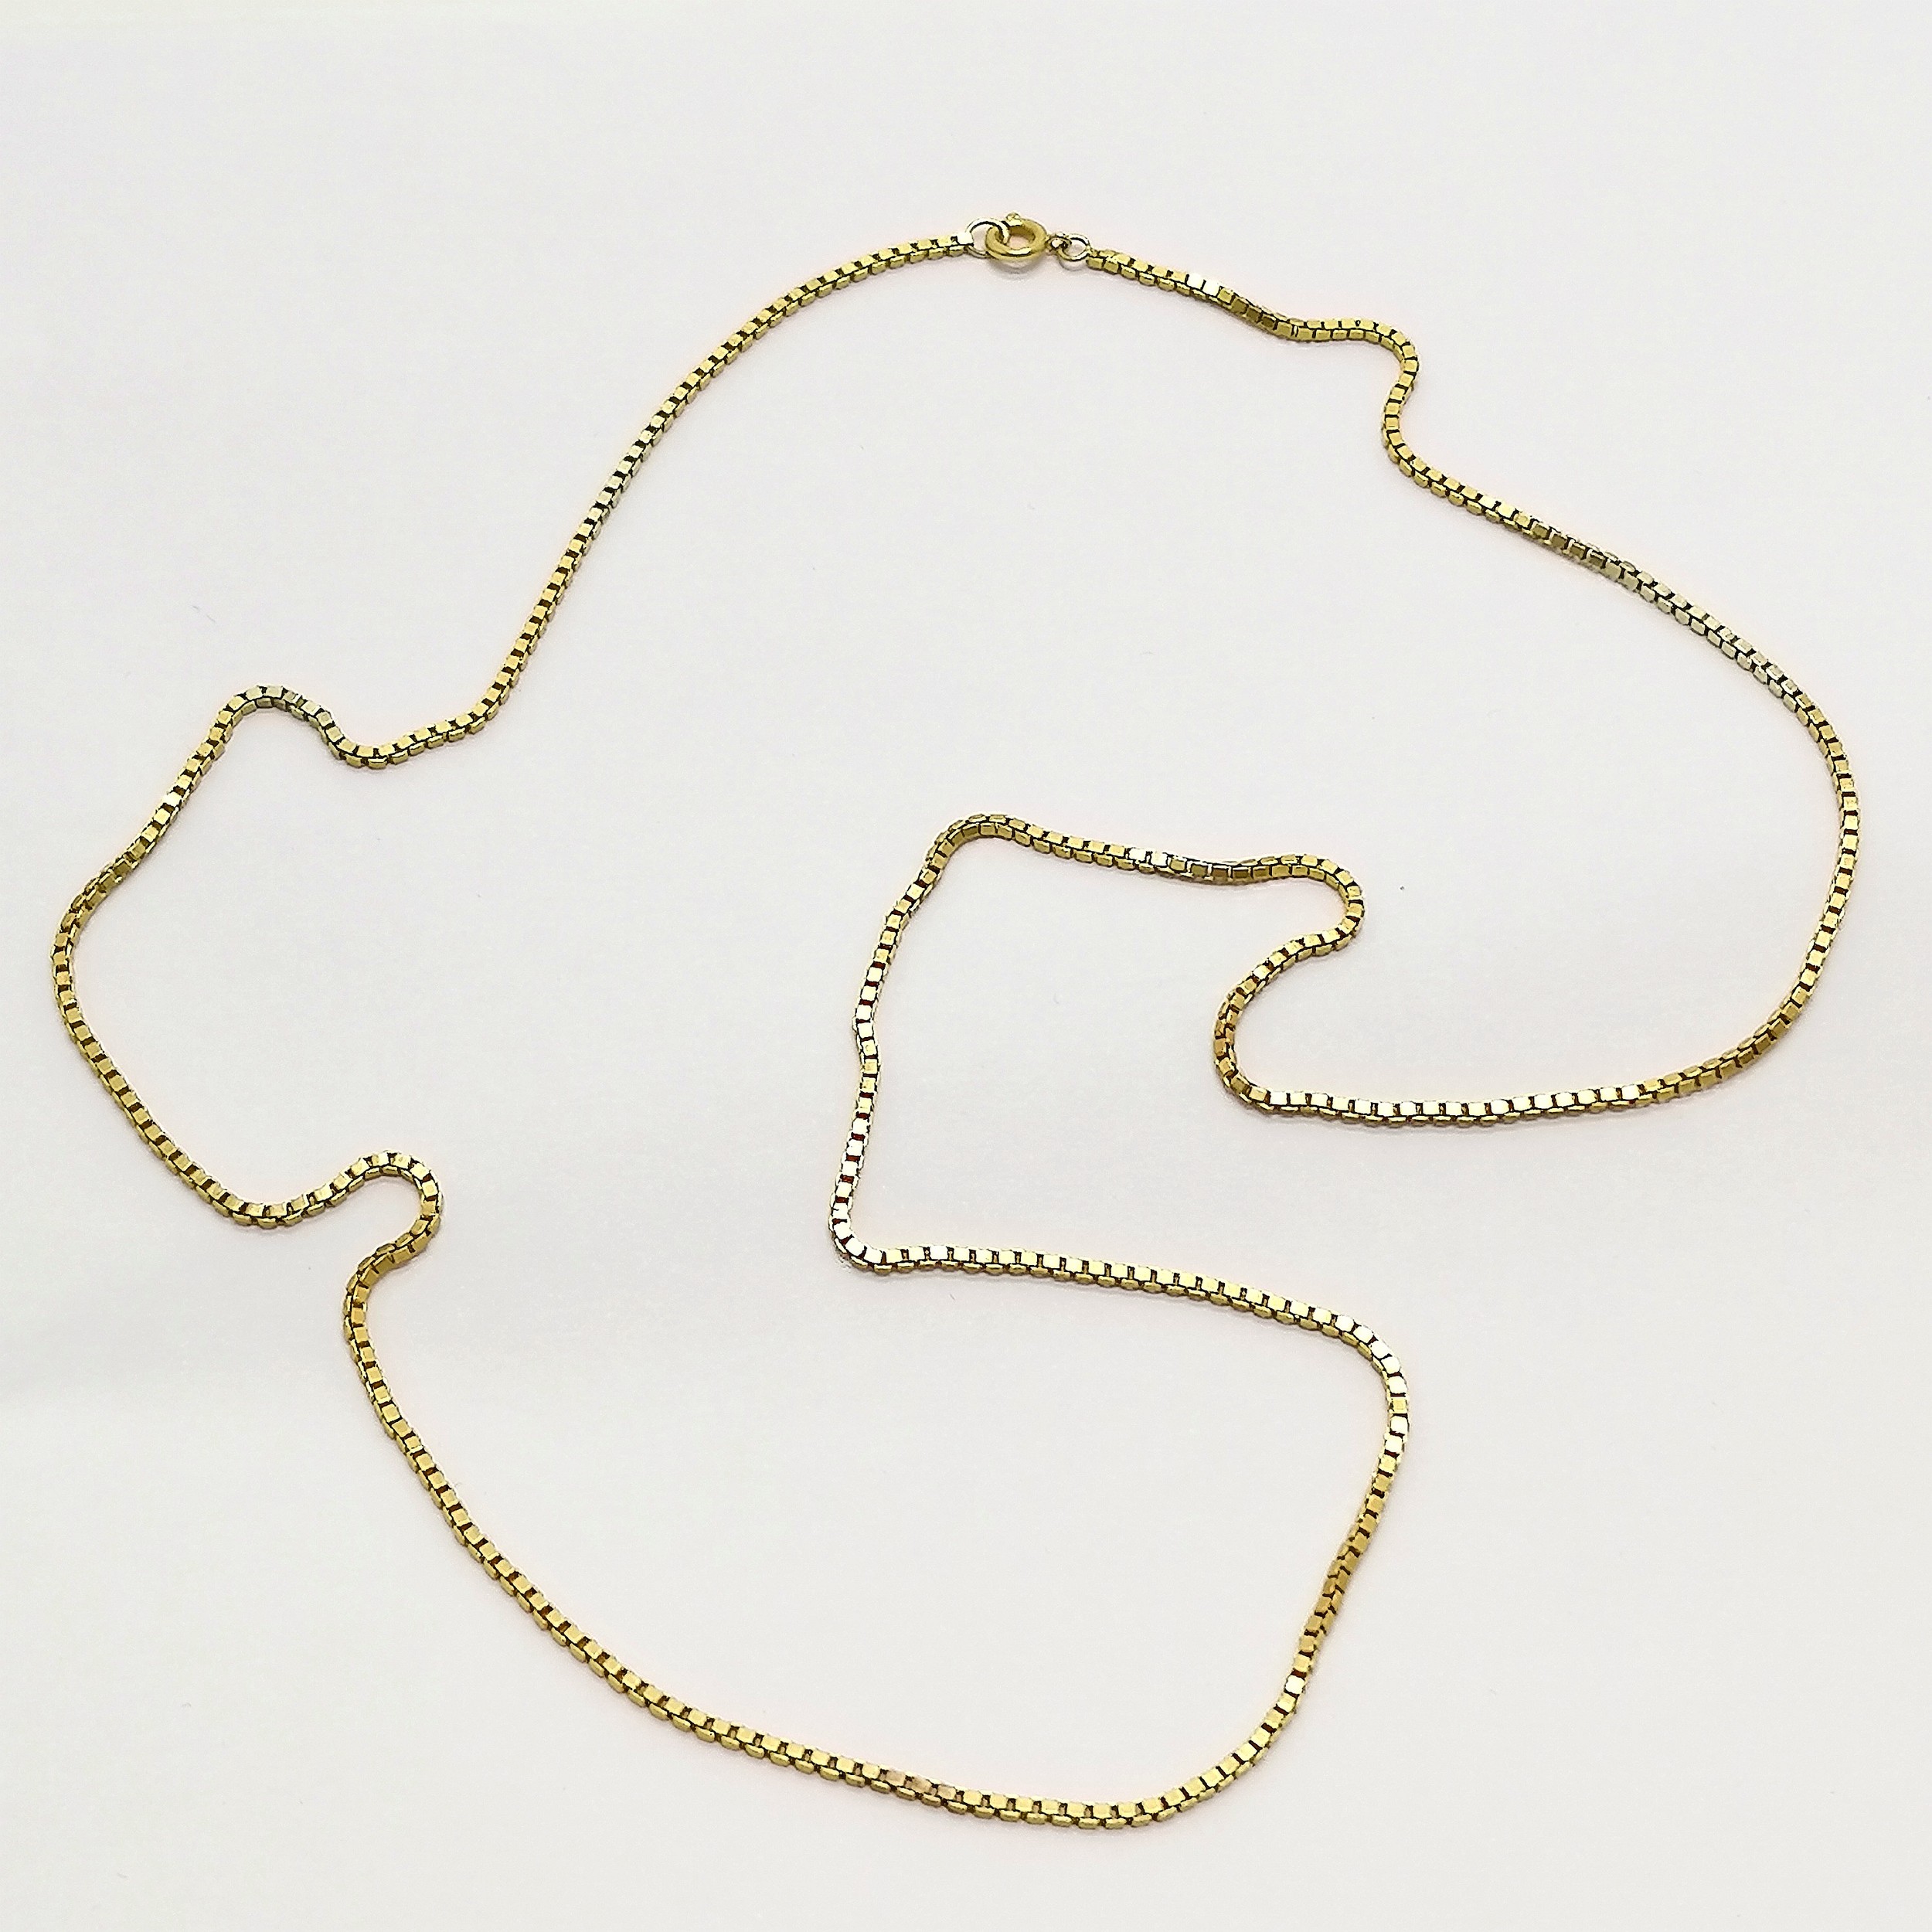 9ct marked gold box link 60cm chain - 7.5g - Image 2 of 2